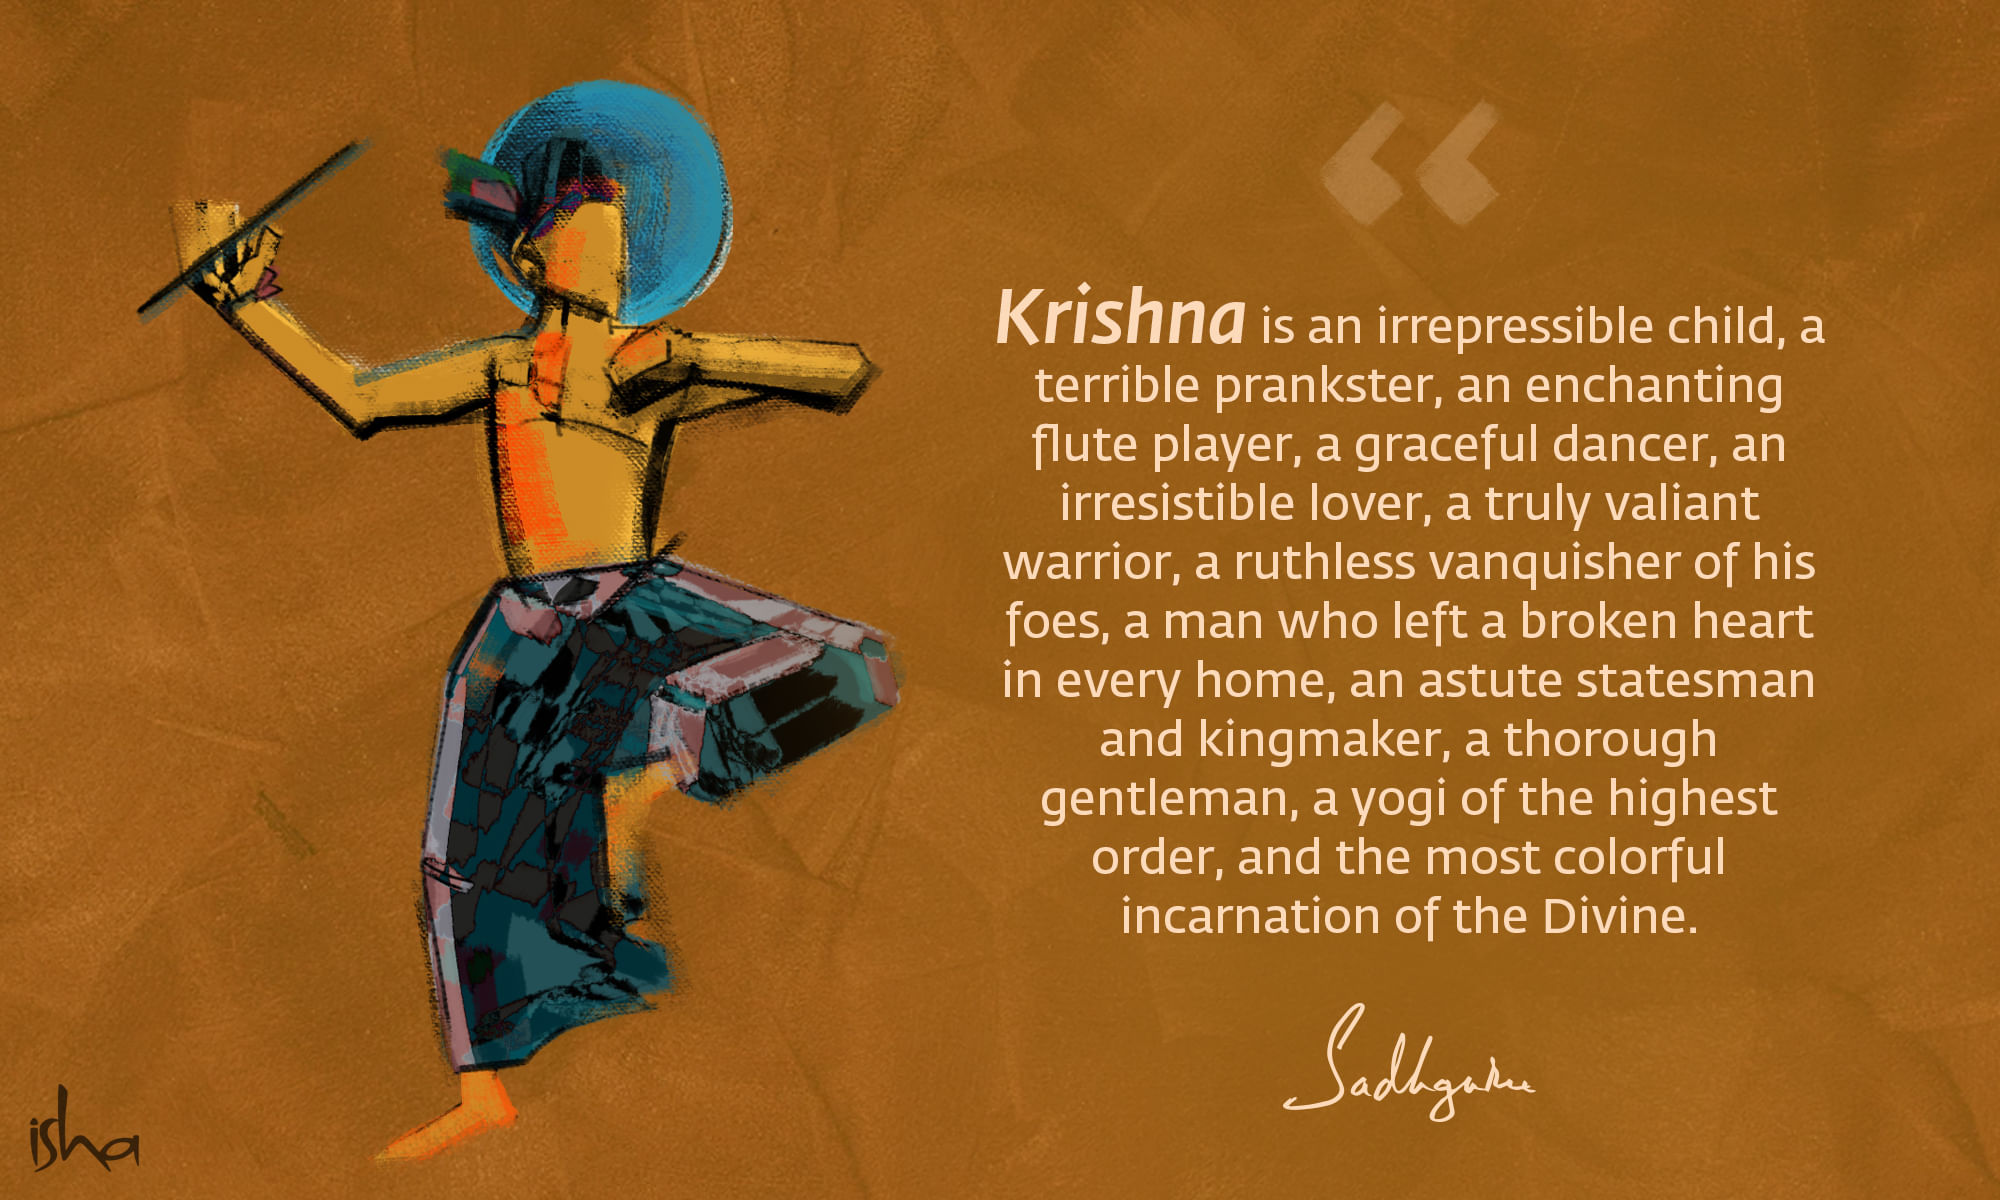 Krishna quote from Sadhguru with abstract Krishna holding a flute.